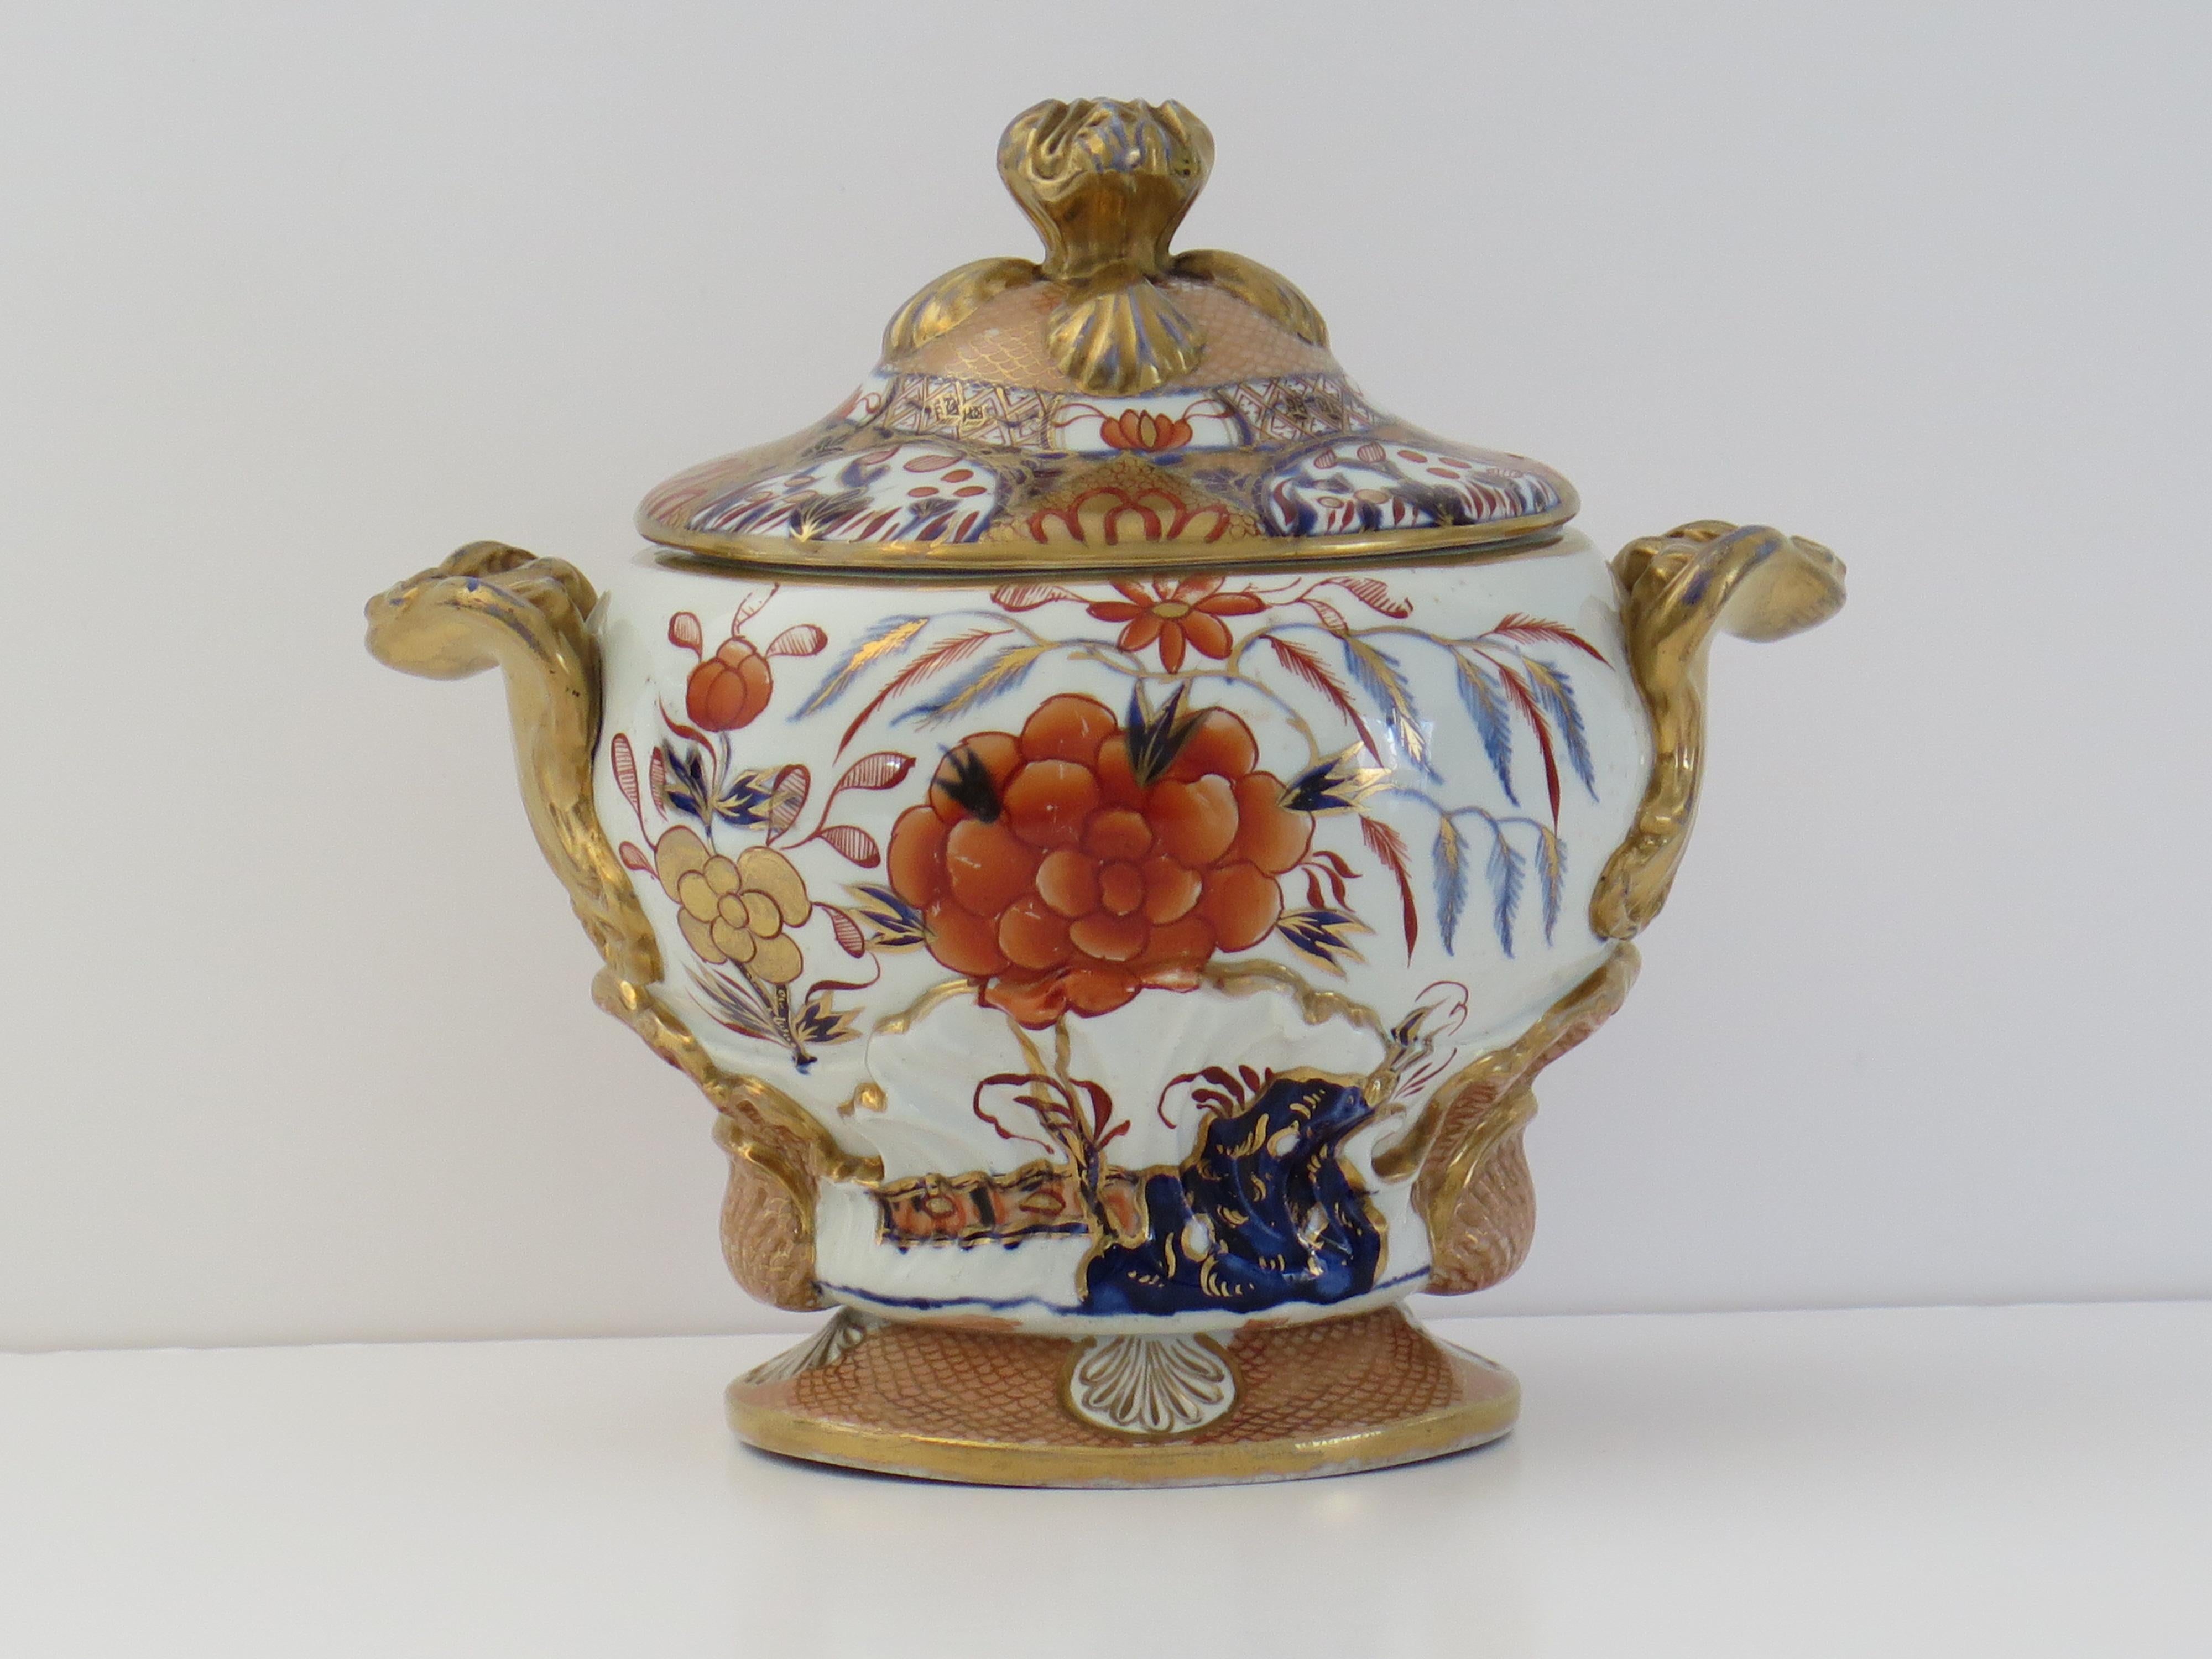 This is a stunning Sauce Tureen by Mason's Ironstone, Lane Delph, England in the rare Fence, Rock & Blue Willow hand painted gilded pattern, dating to the very early period of Mason's ironstone, circa 1818.

This is a rare shaped Tureen

Both